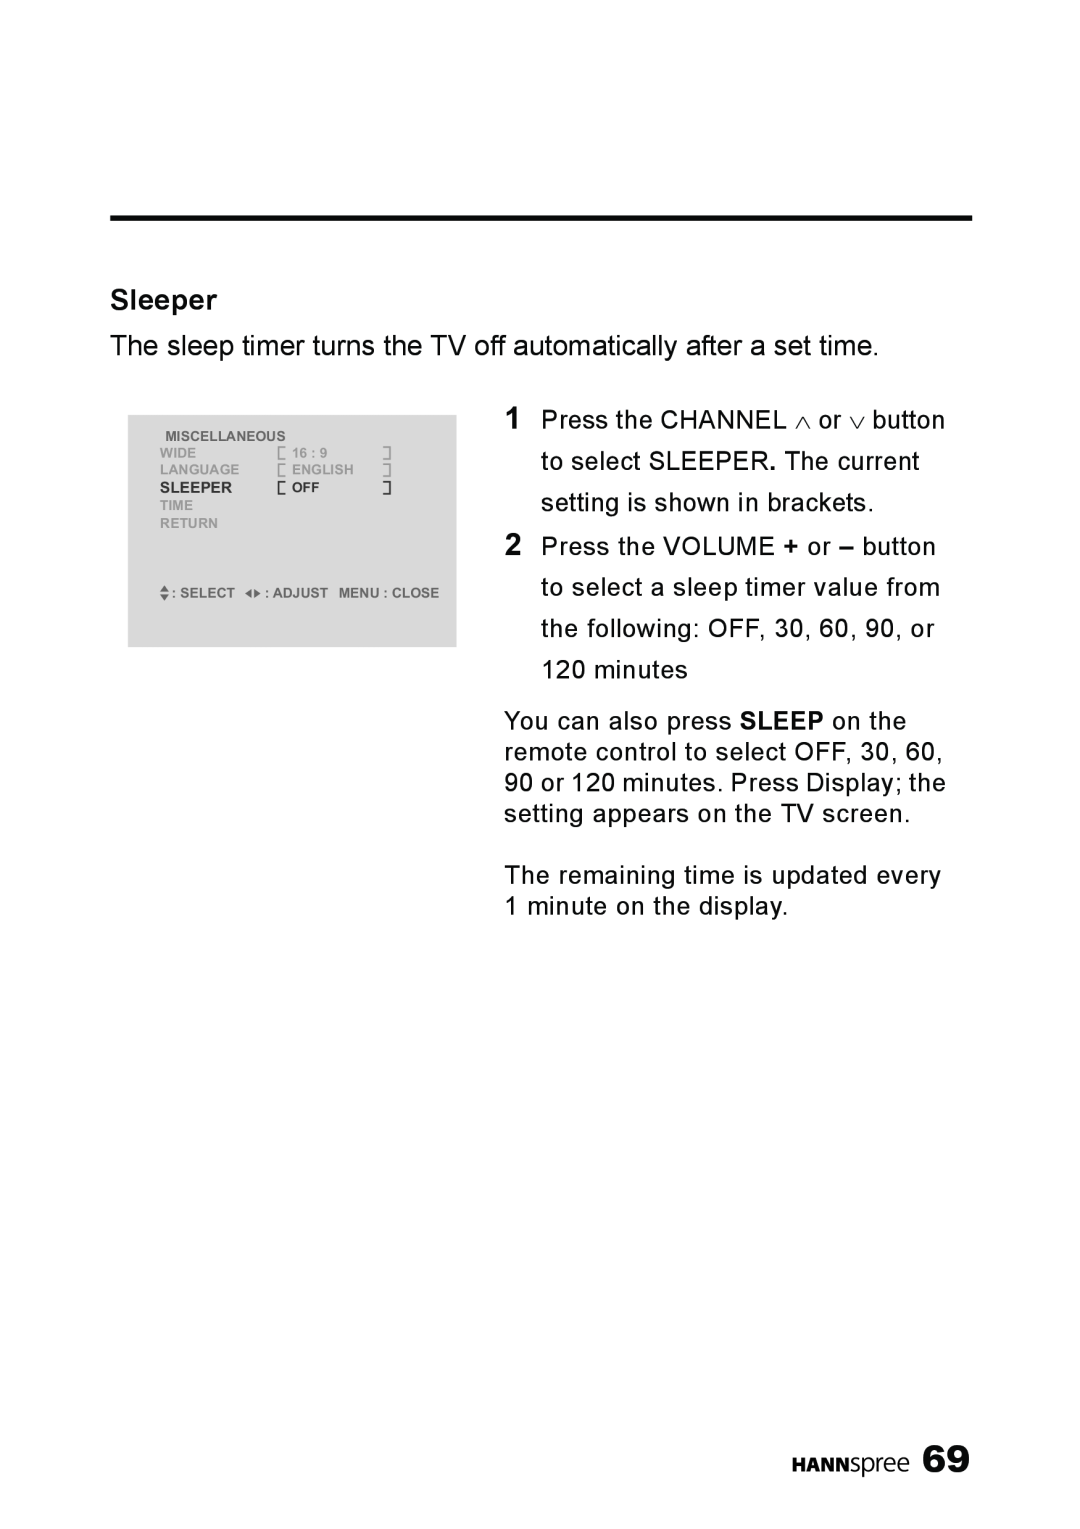 HANNspree LT11-23A1 user manual Sleeper, The sleep timer turns the TV off automatically after a set time 